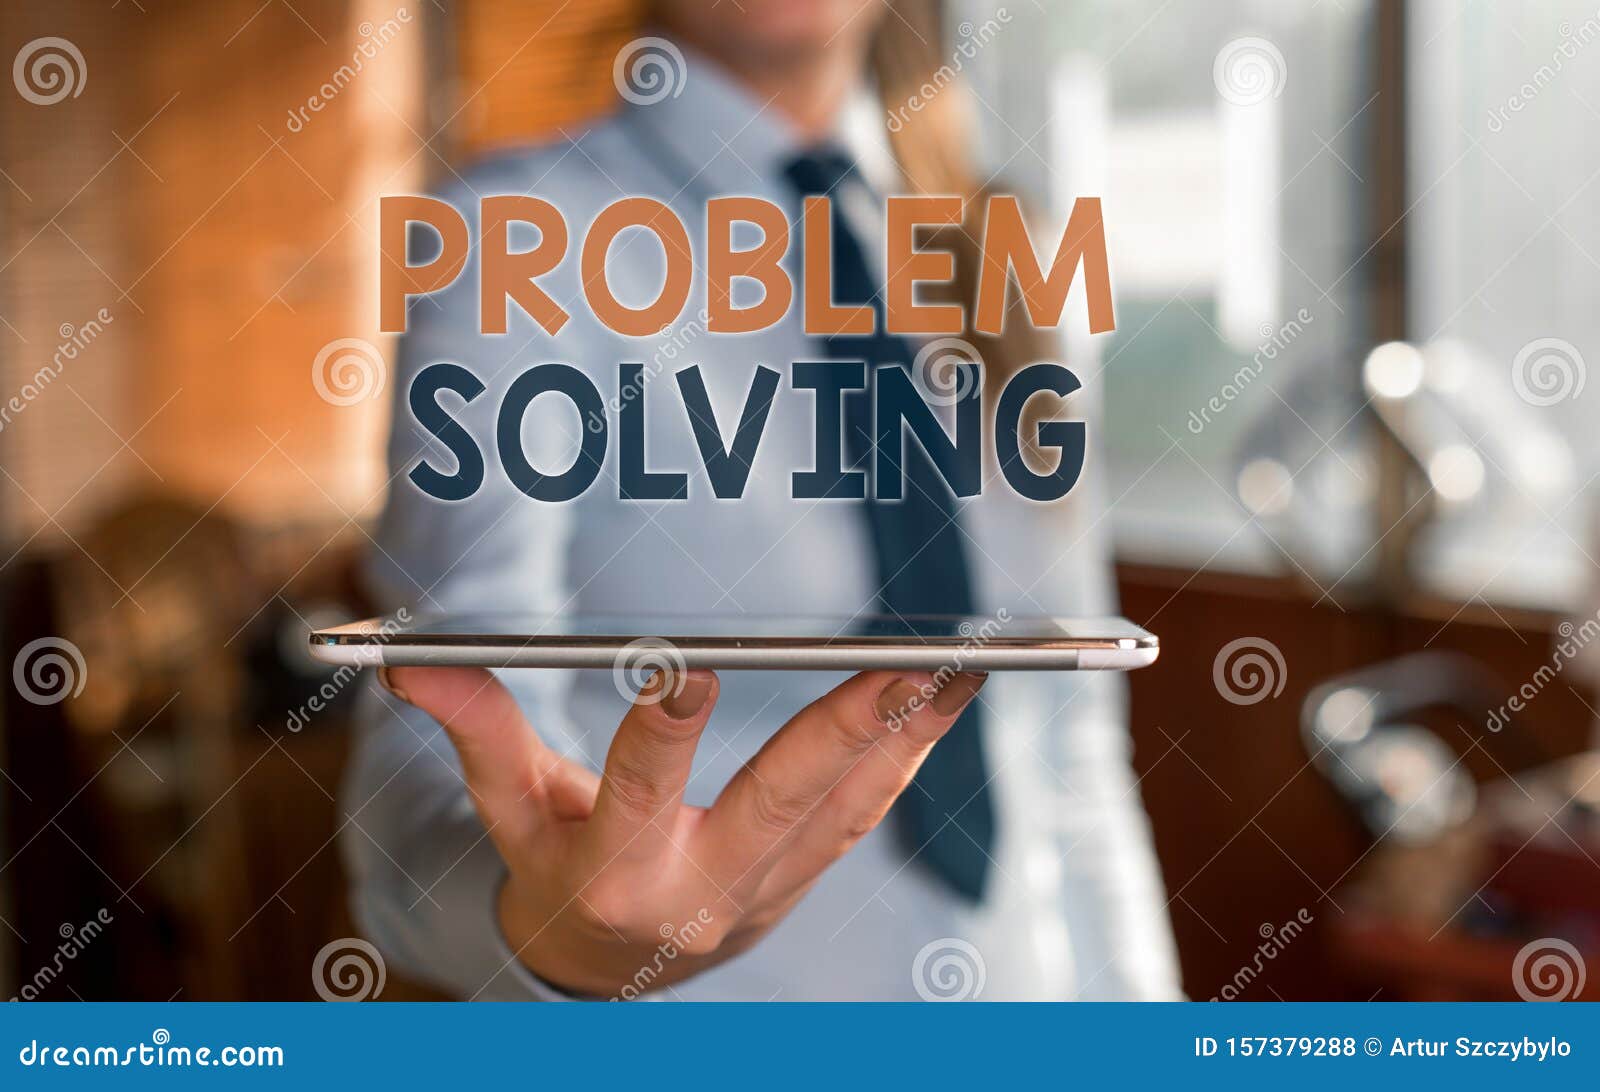 pay to write business problem solving